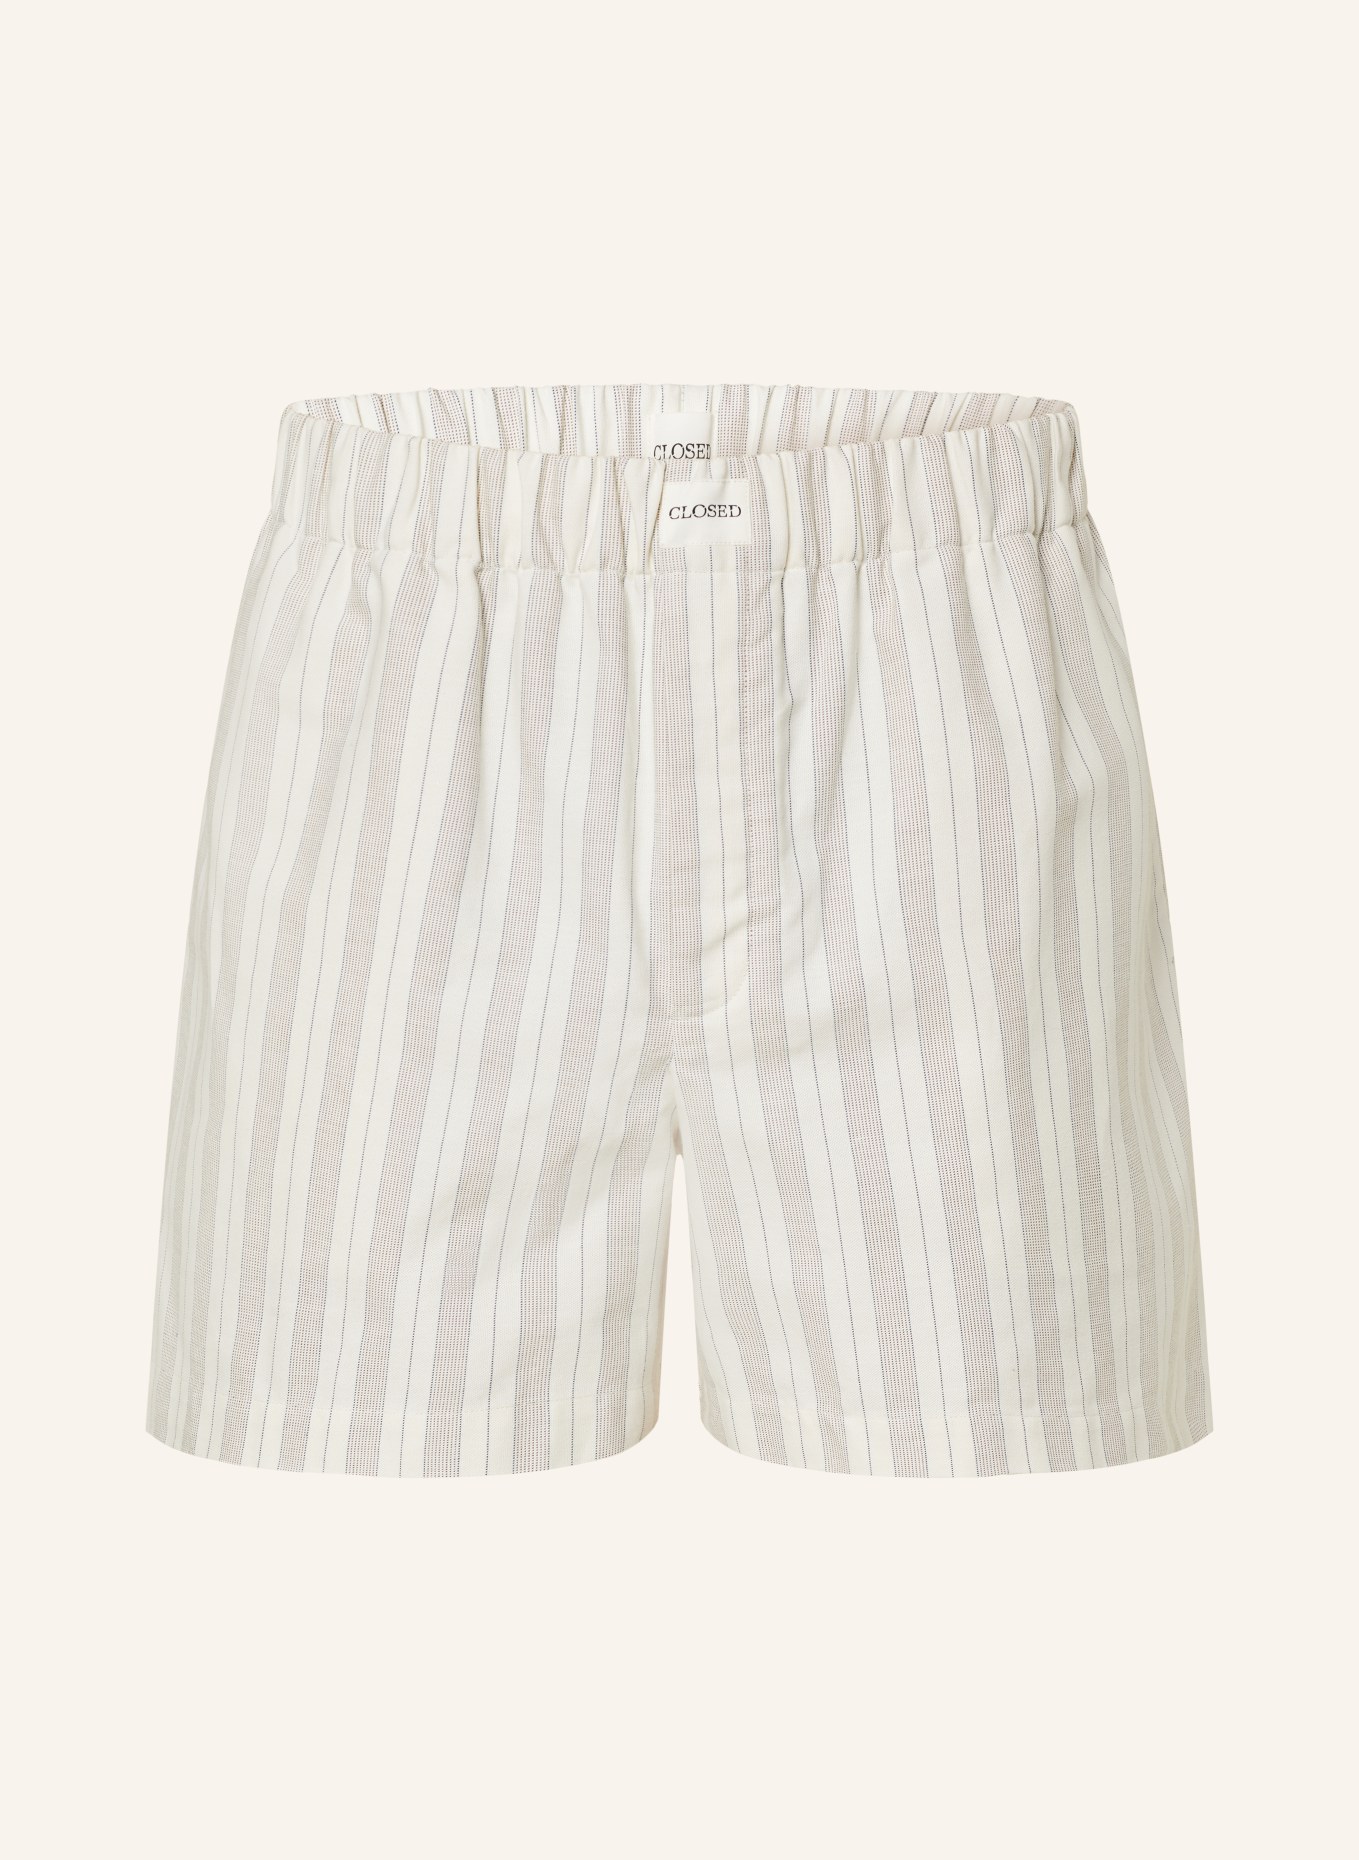 CLOSED Shorts, Color: CREAM/ BEIGE/ TEAL (Image 1)